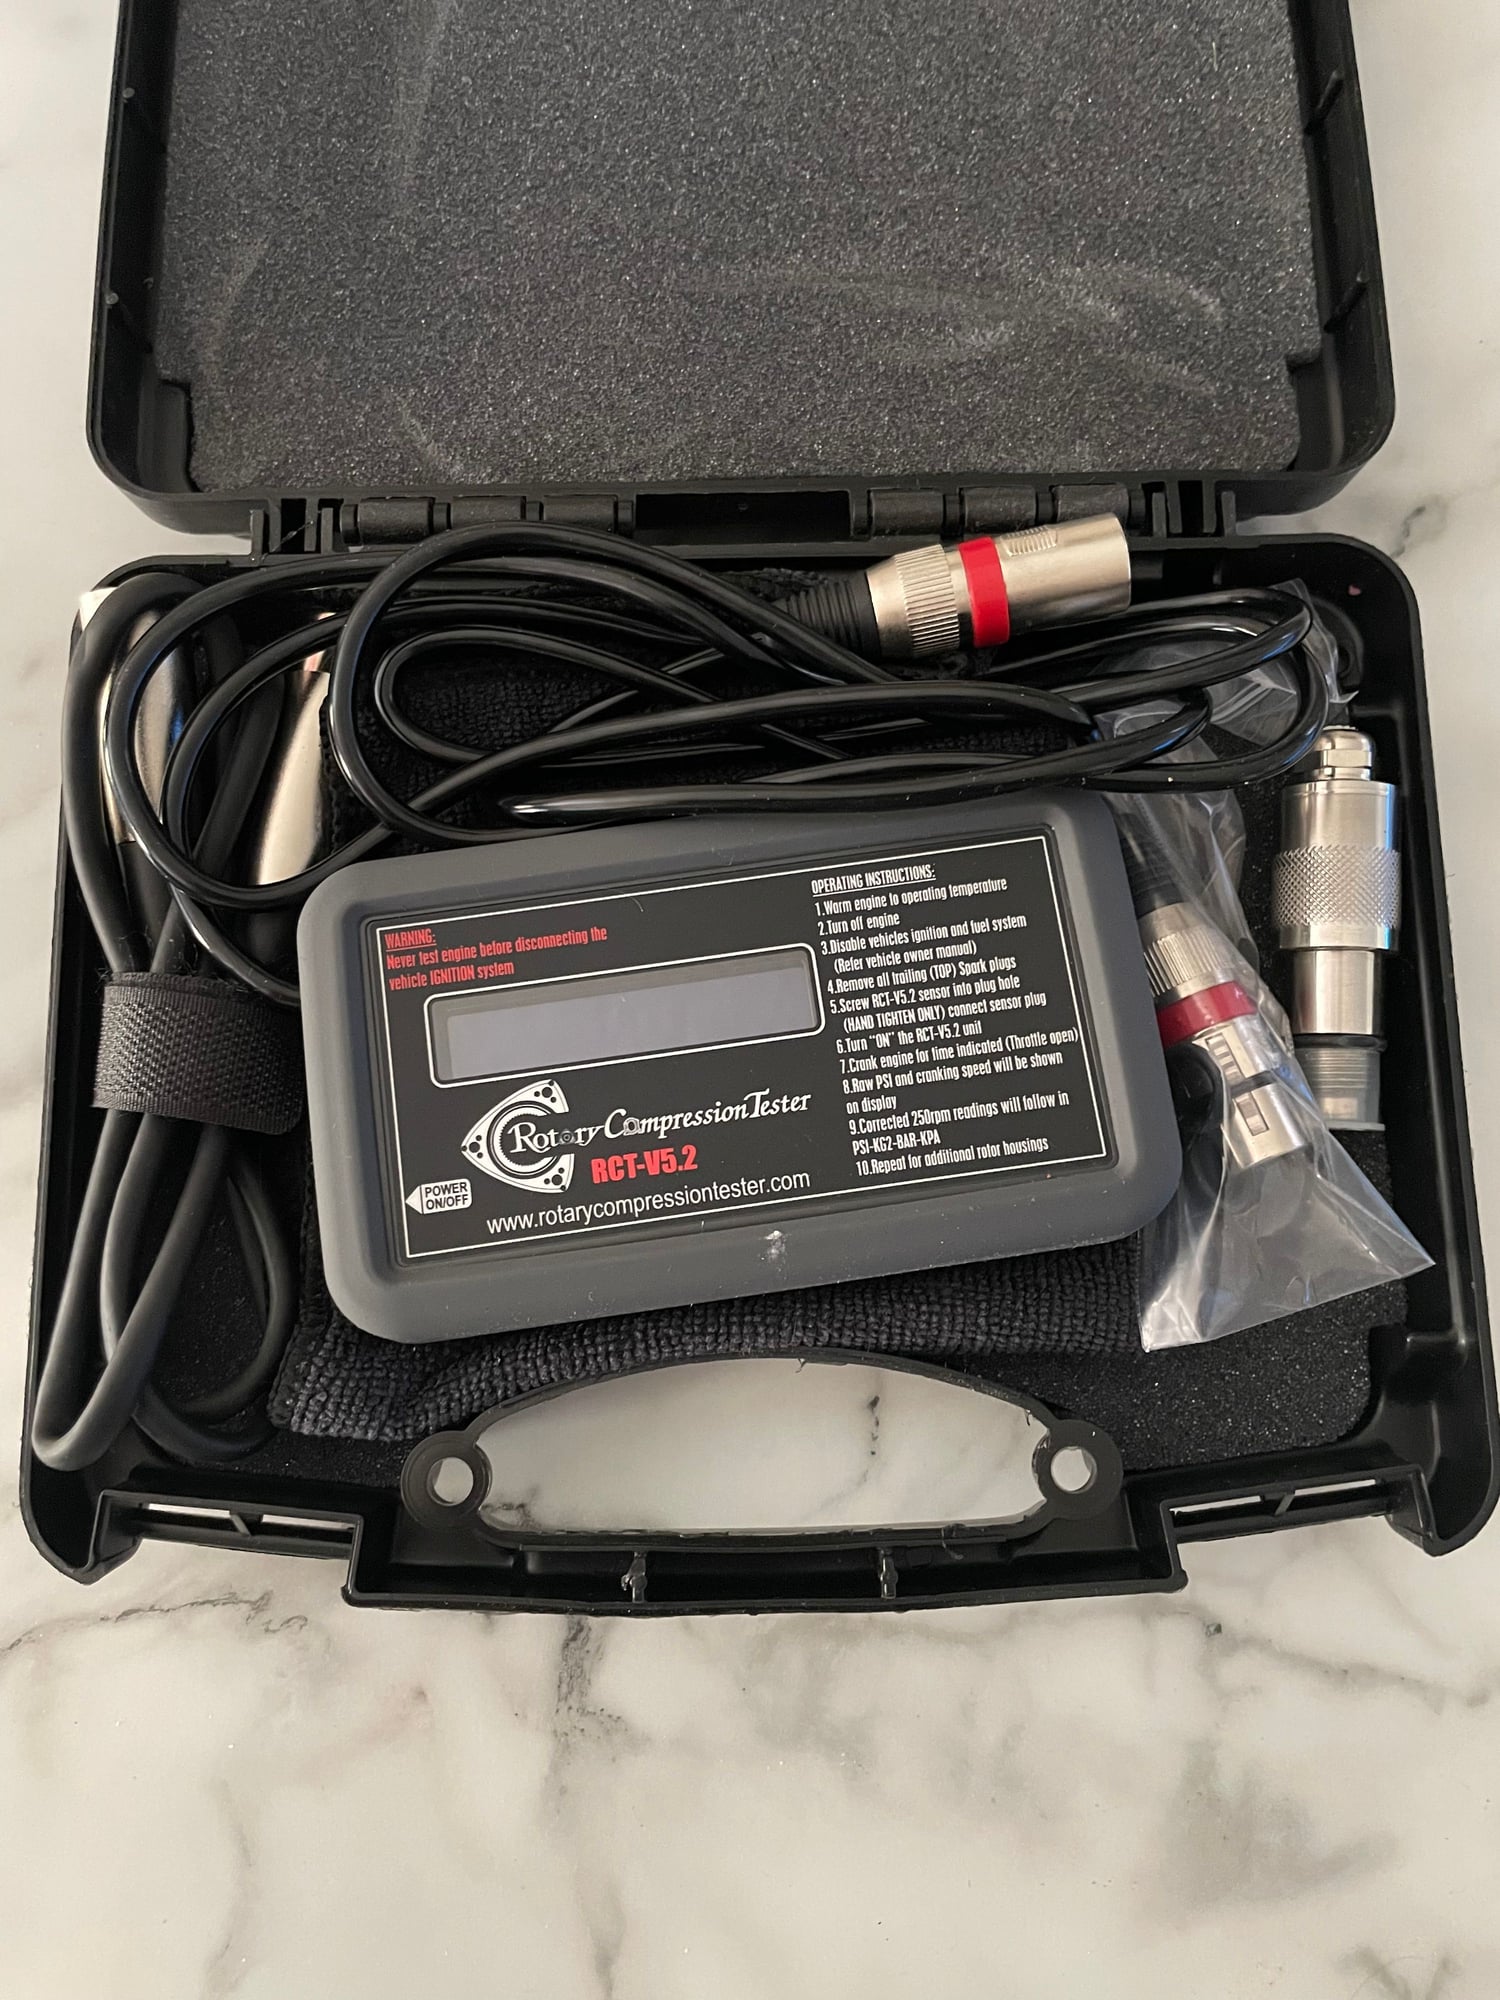 Miscellaneous - Rotary compression tester like new - Used - 0  All Models - Phoenix, AZ 85032, United States